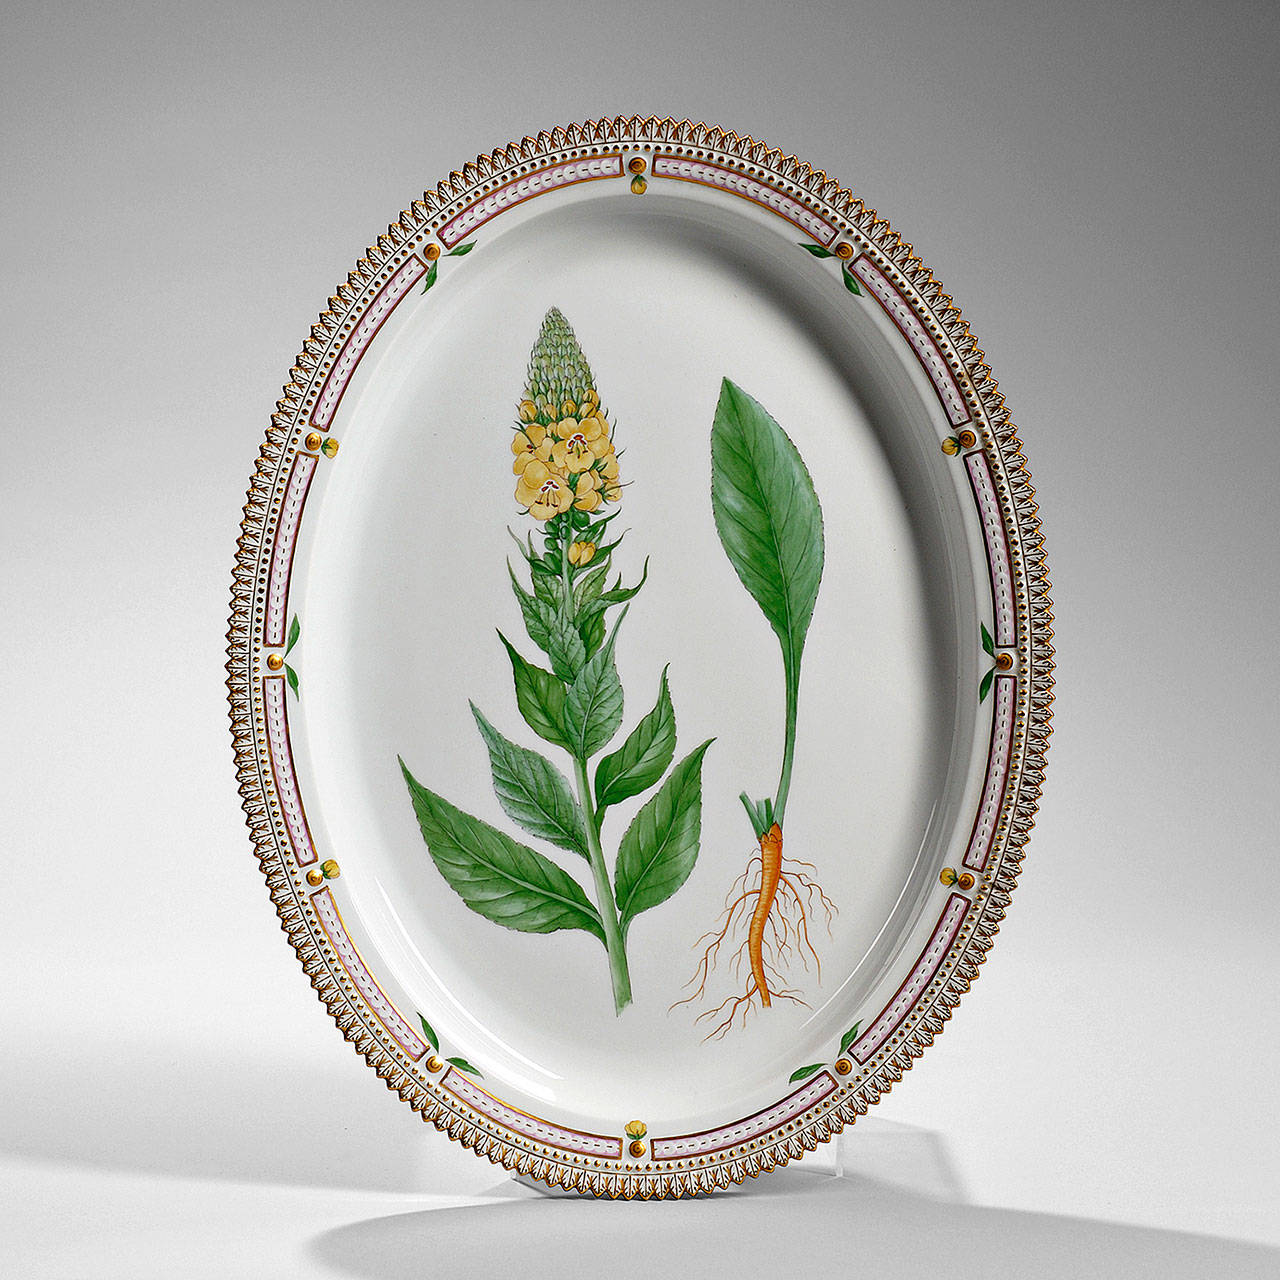 This 20th-century Flora Danica porcelain platter is 18½ inches by 14¼ inches. It features a tall, yellow mullein flower. The dish is fully marked on the bottom with factory marks and the impressed number 3520. Auction price, $984 in a Skinner Inc. auction in Massachusetts.                                (Cowles Syndicate Inc. photo)